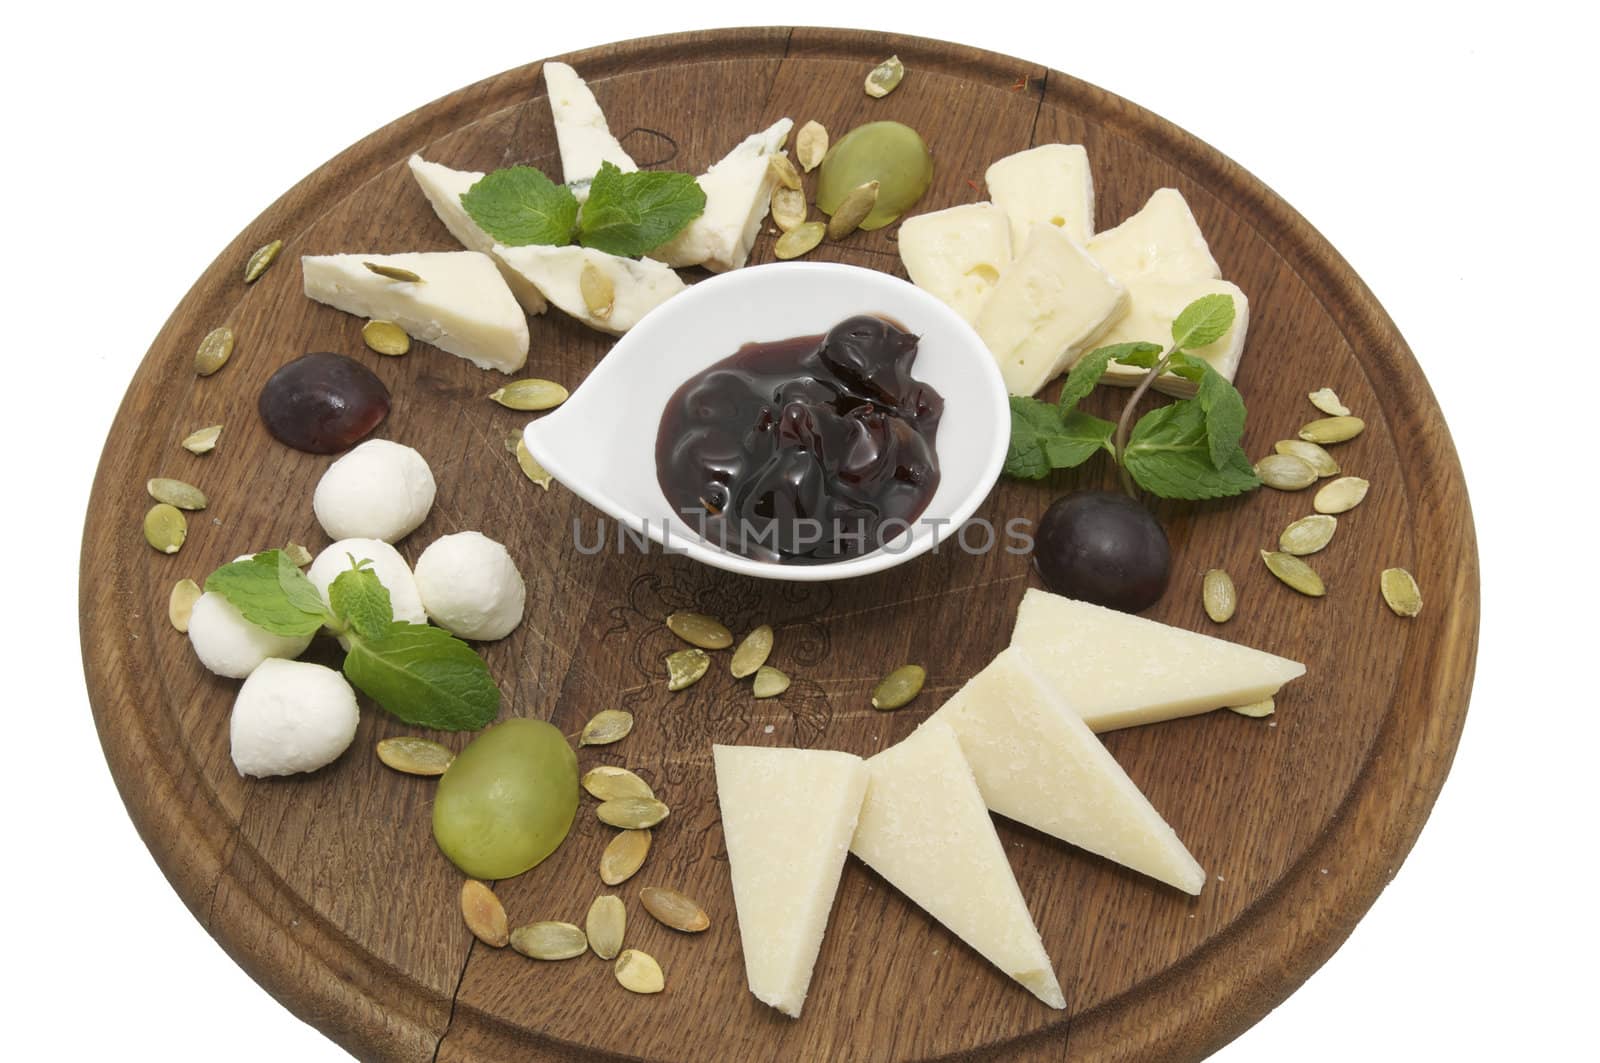 wooden plate with cheeses by Lester120